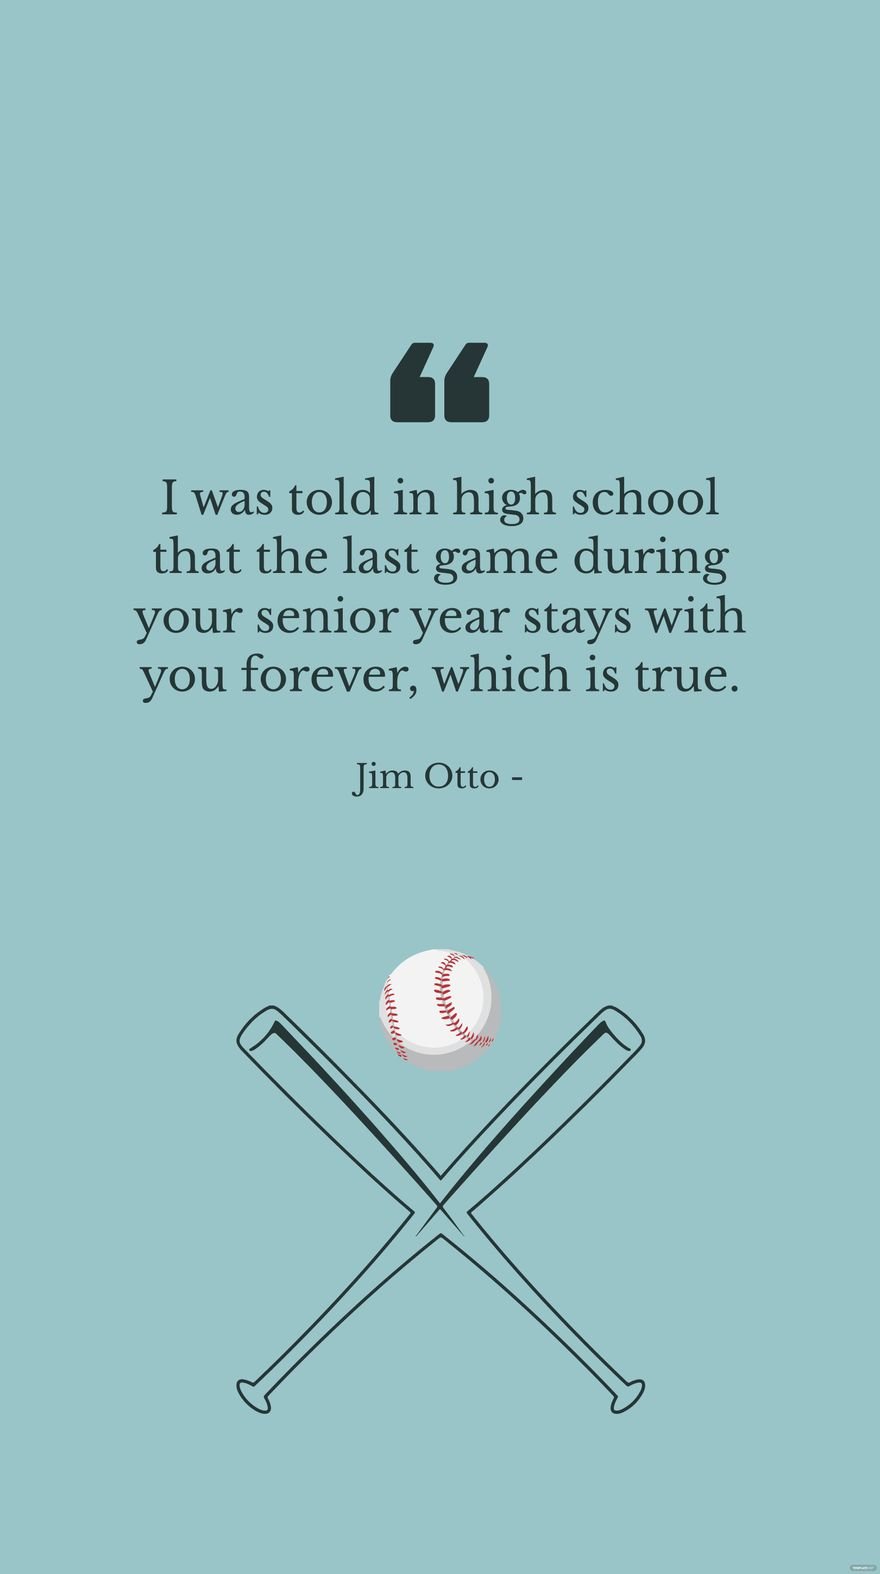 Jim Otto - I was told in high school that the last game during your senior year stays with you forever, which is true.